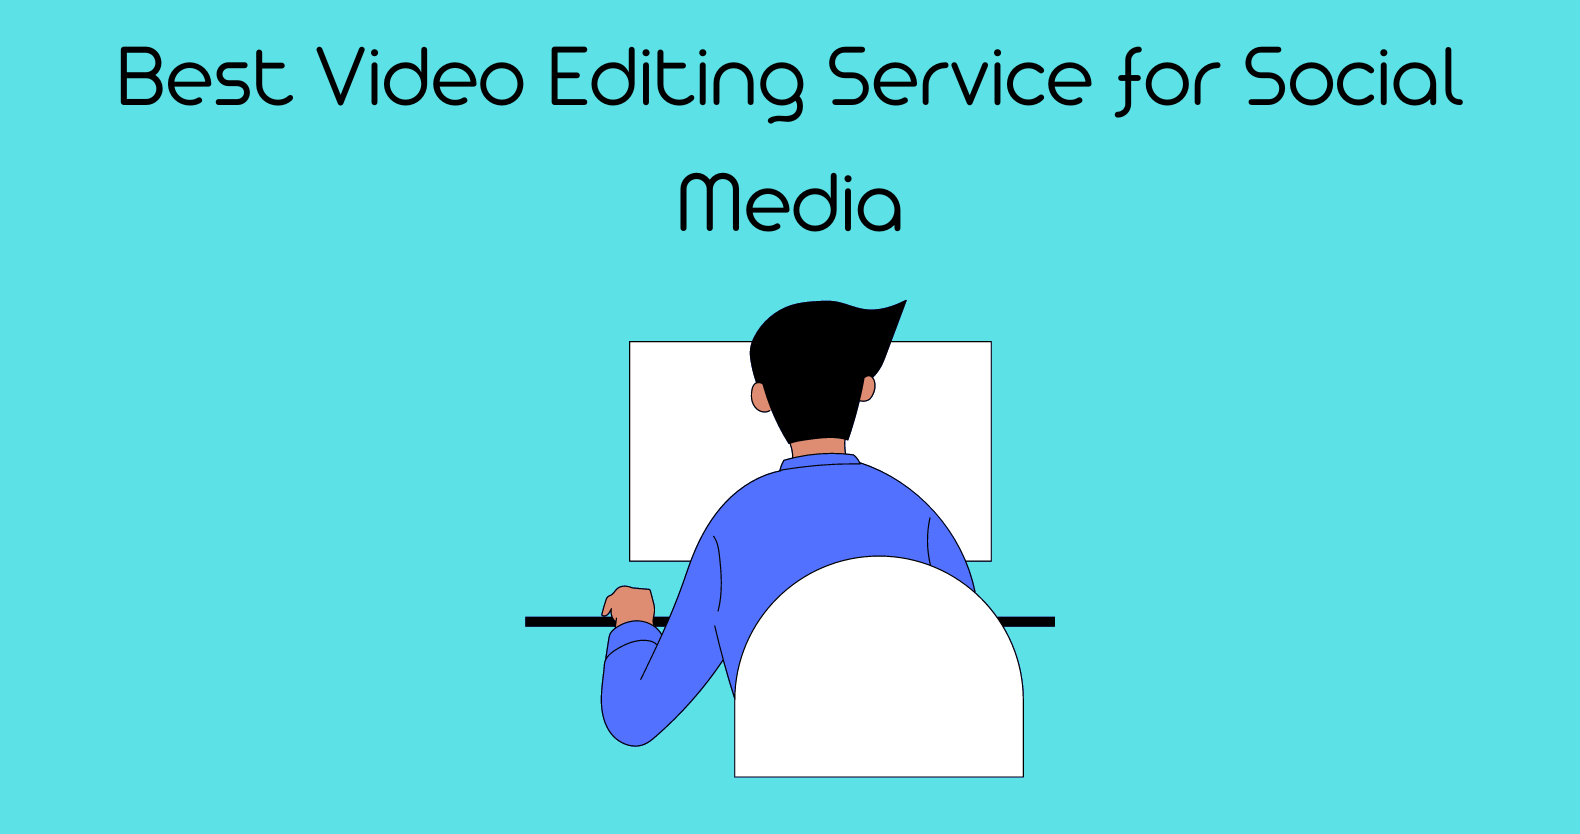 Best Video Editing Service for Social Media